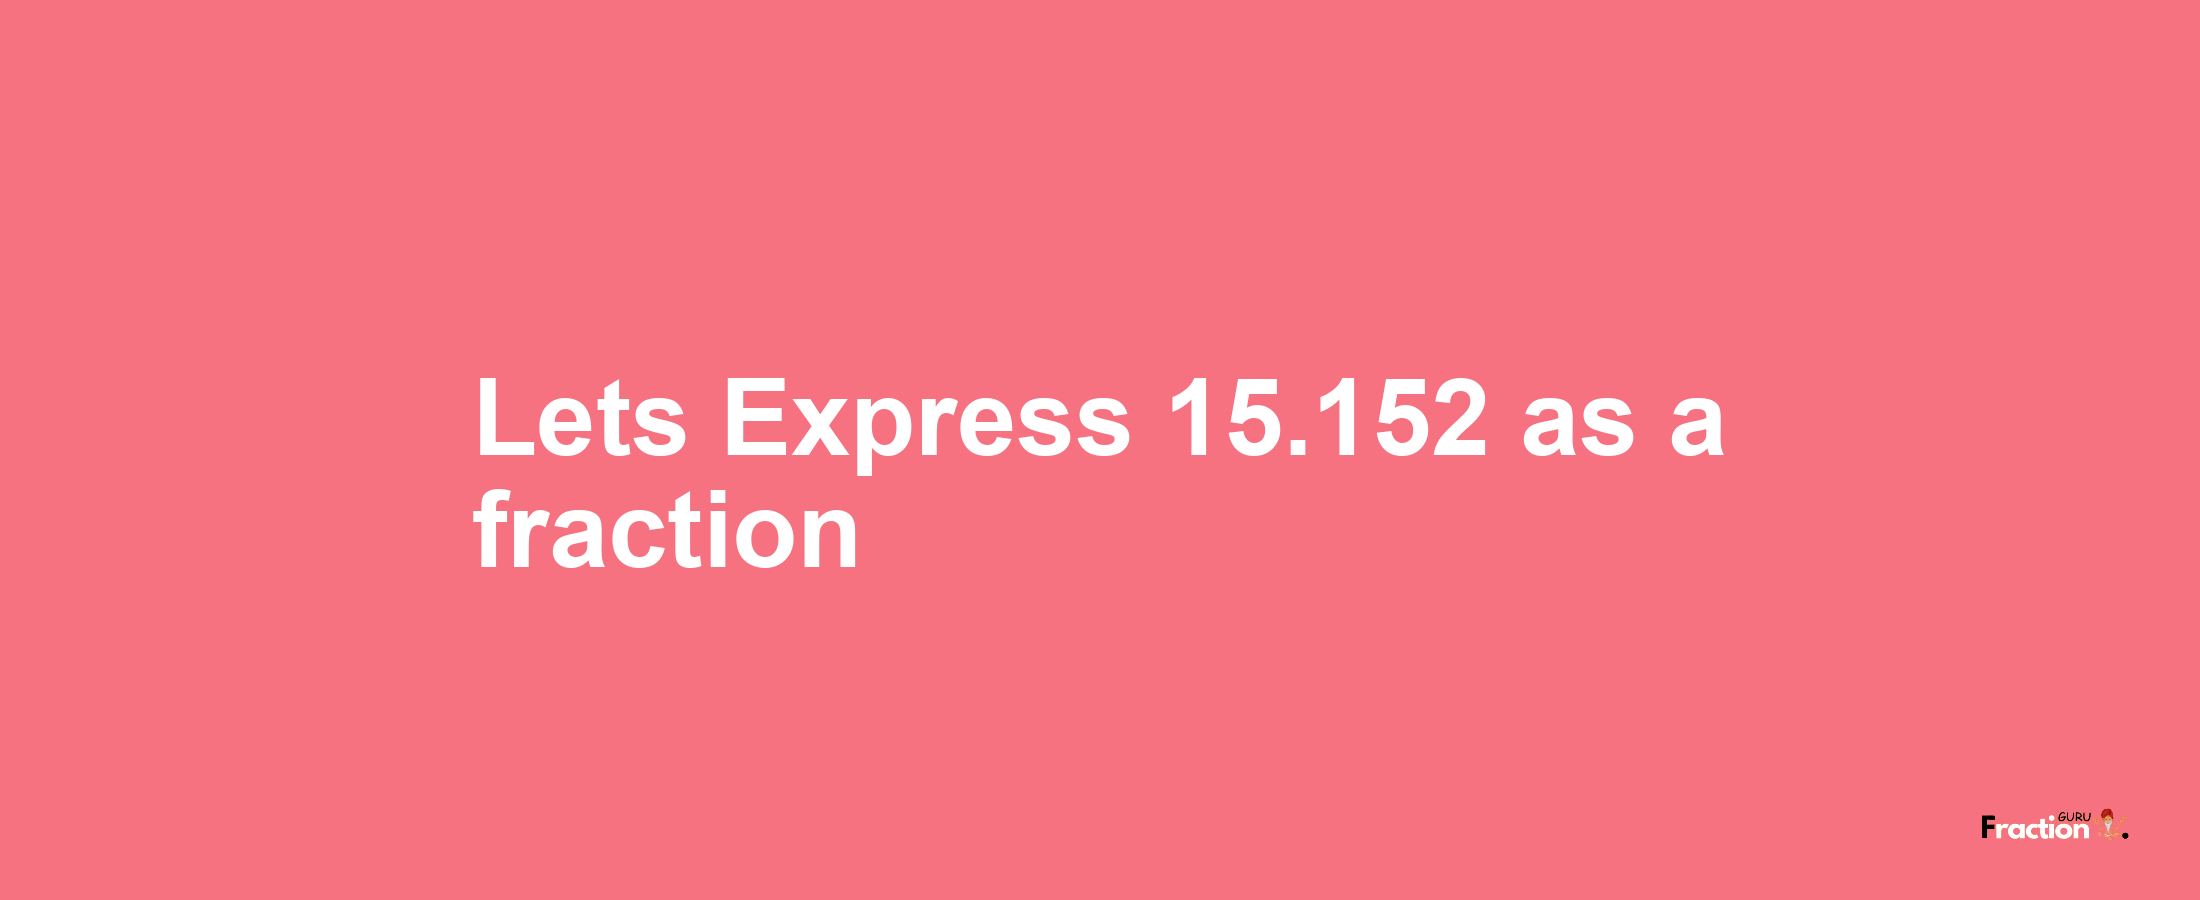 Lets Express 15.152 as afraction